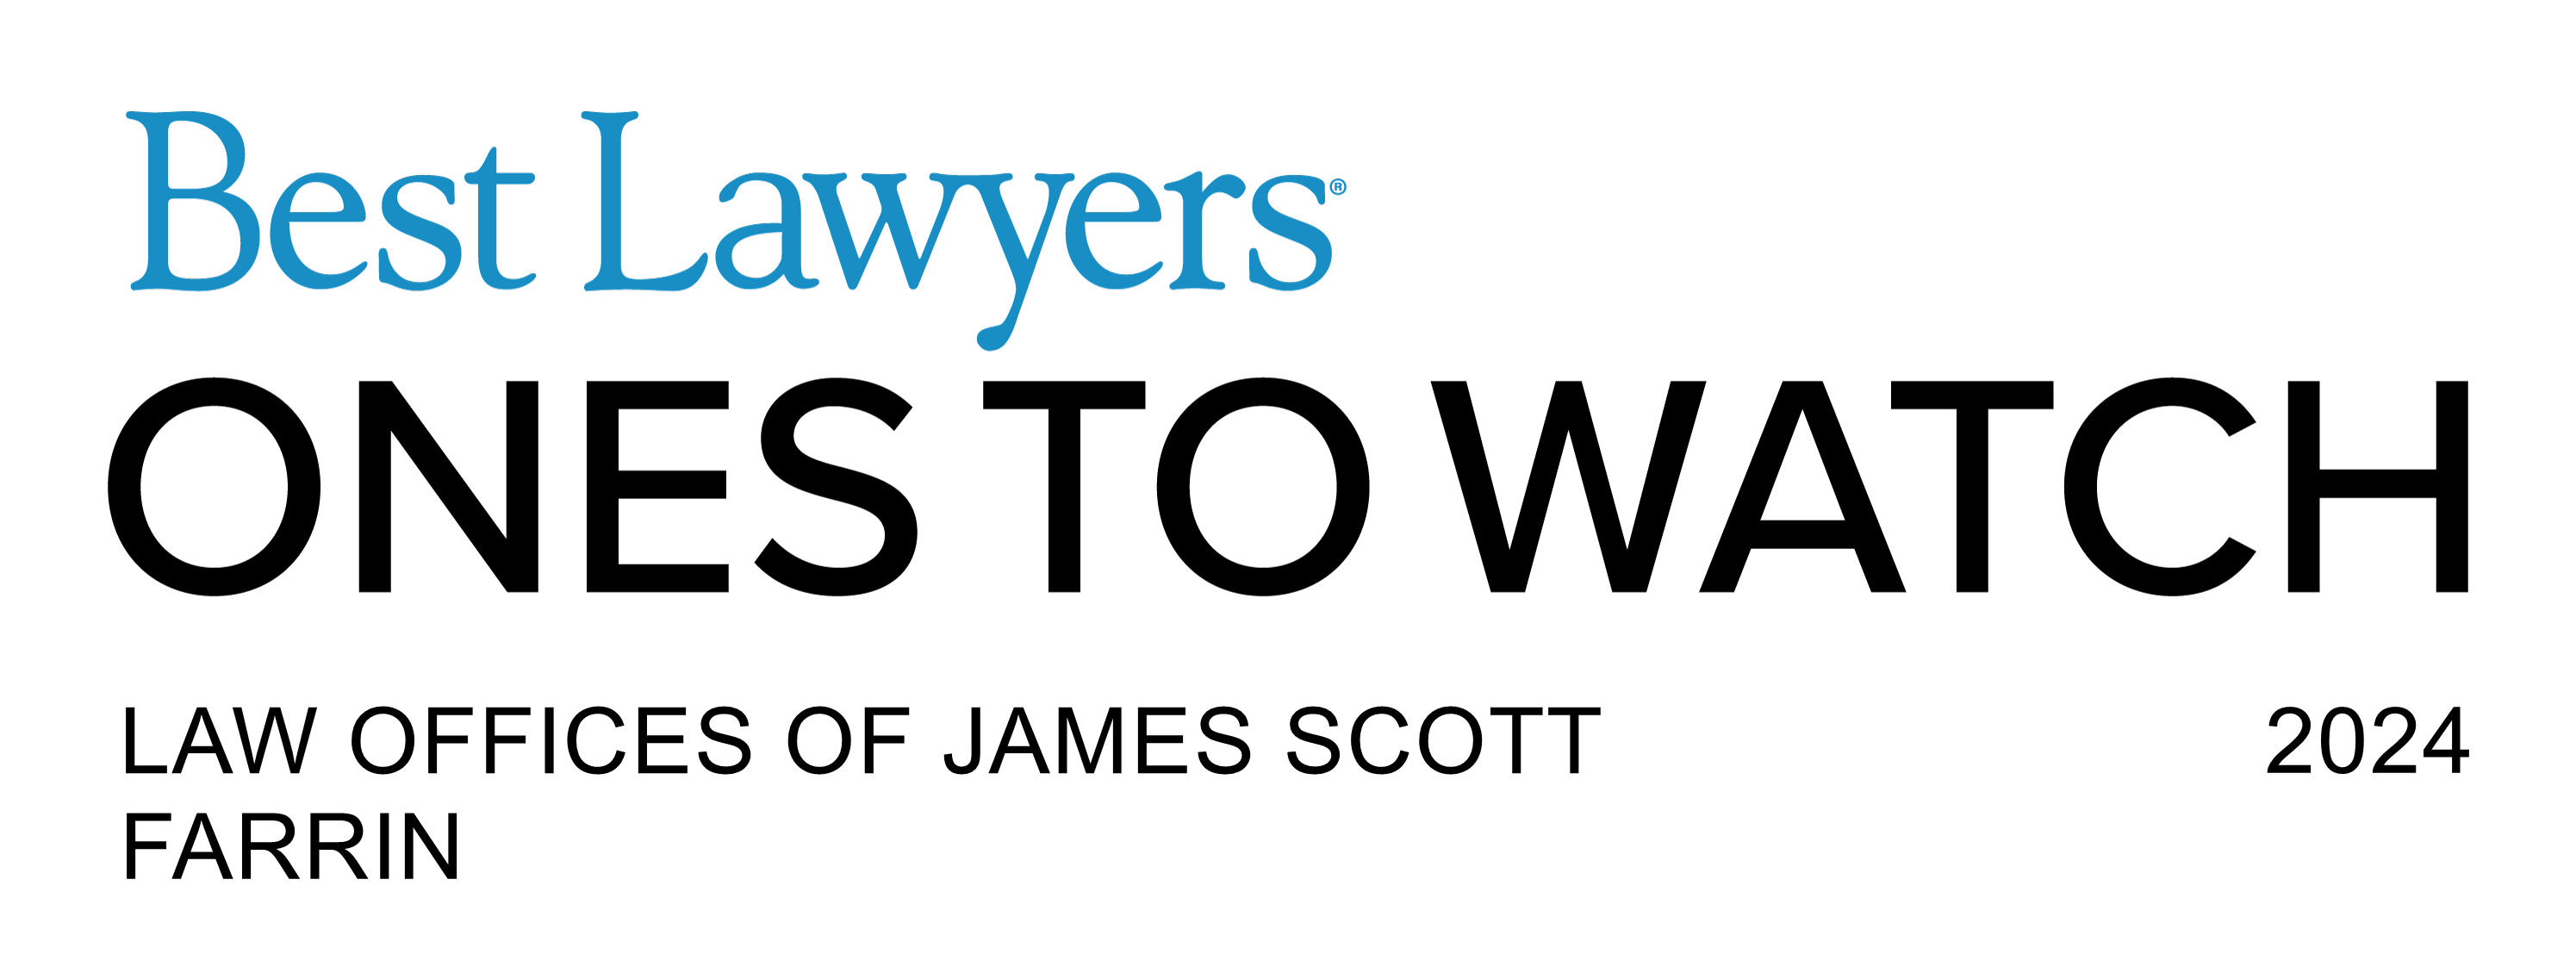 Best Lawyers Ones to Watch 2024 Logo